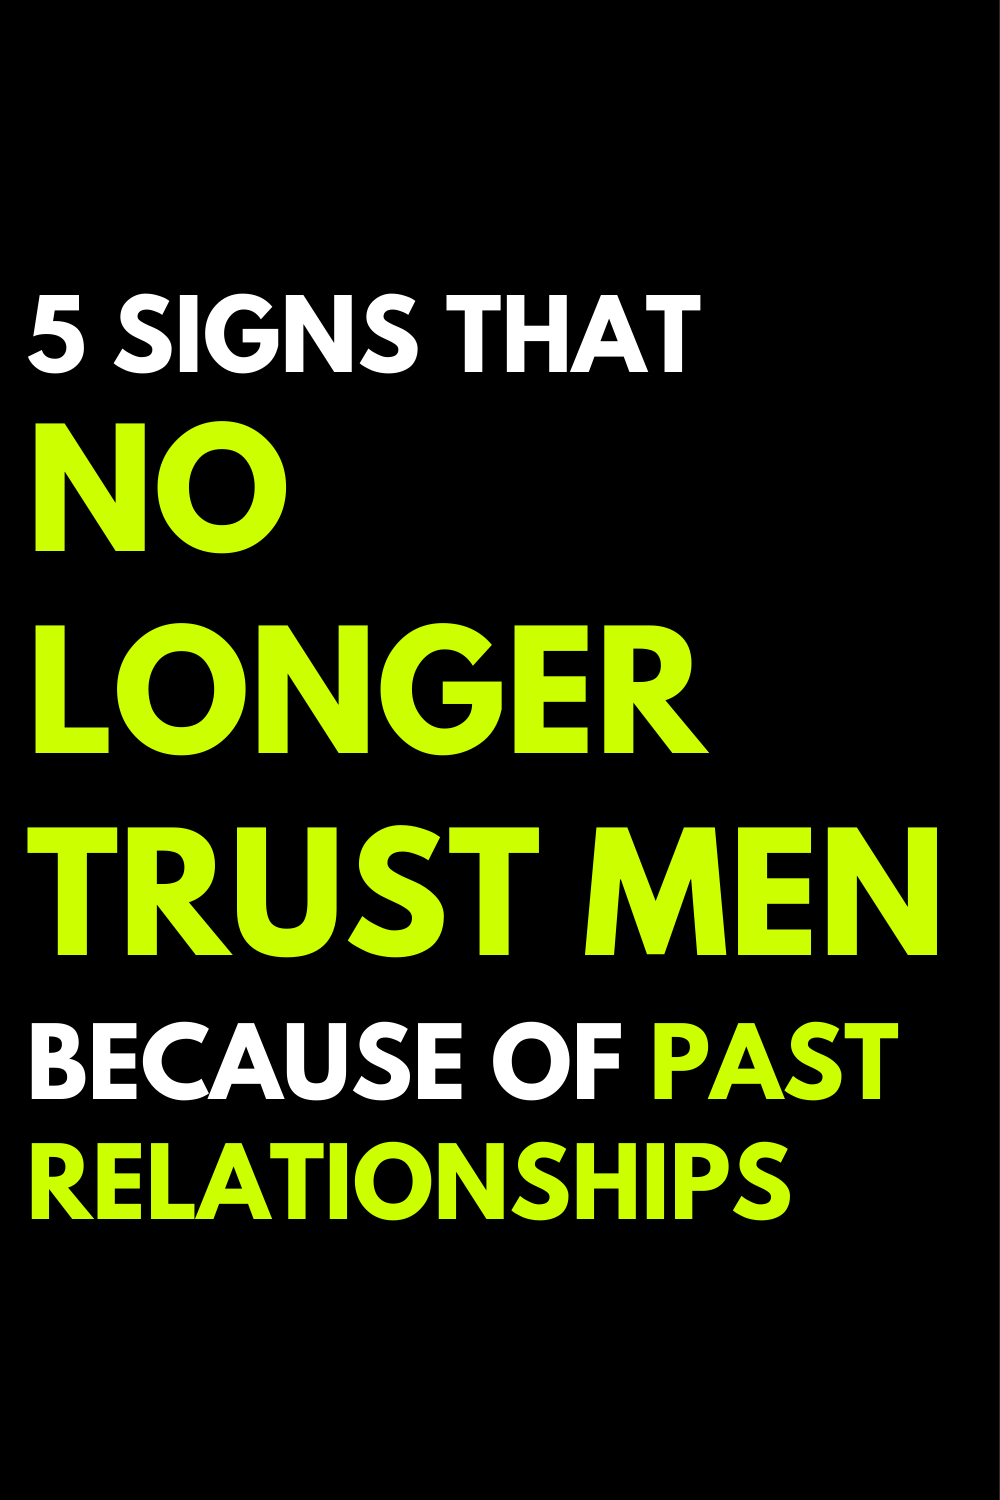 5 signs that no longer trust men because of past relationships